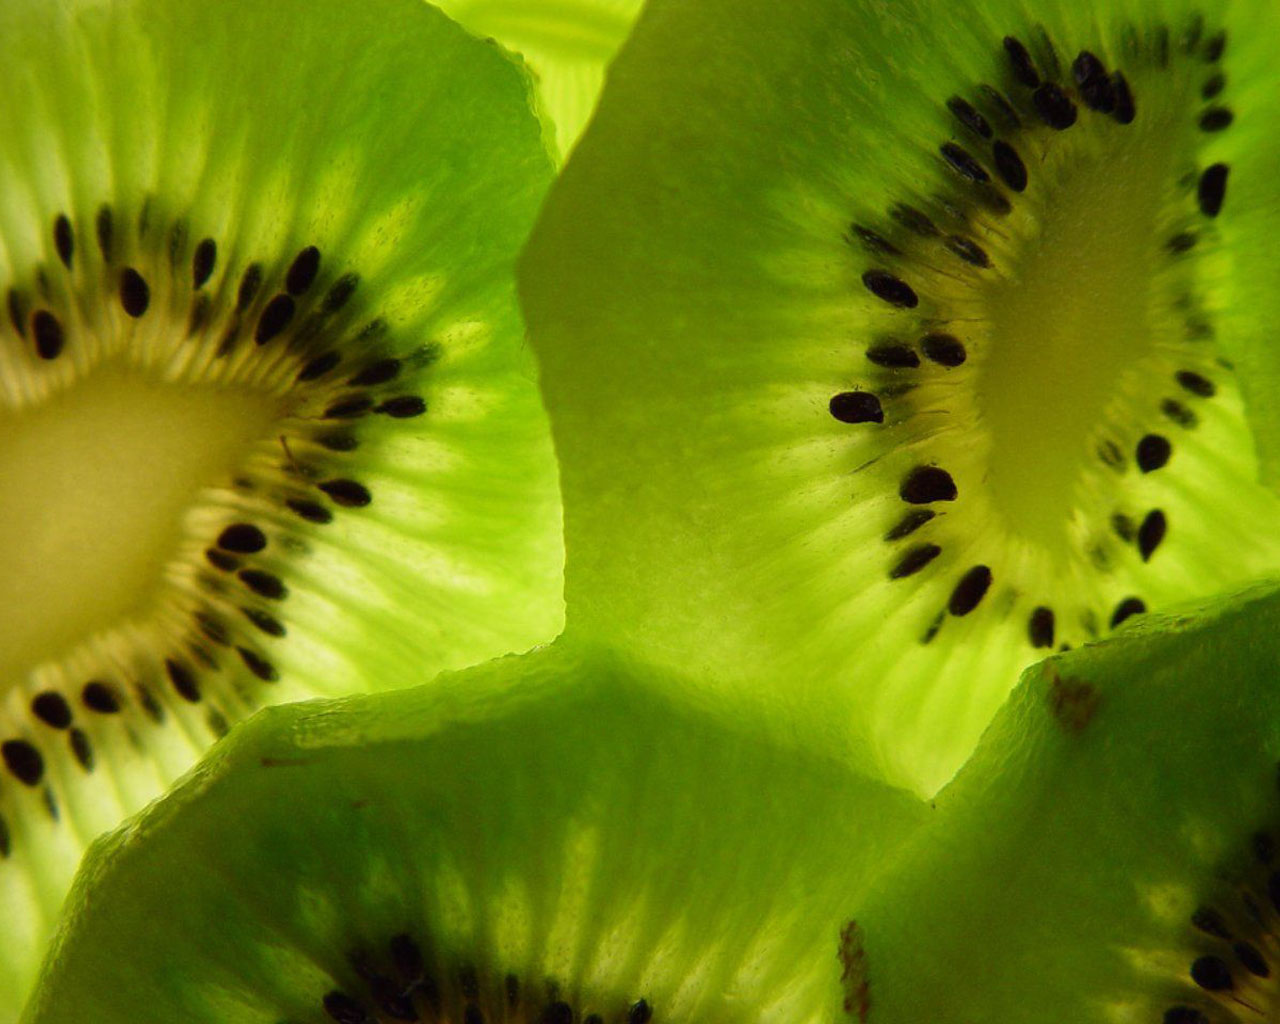 Kiwi Image HD Wallpaper And Background Photos